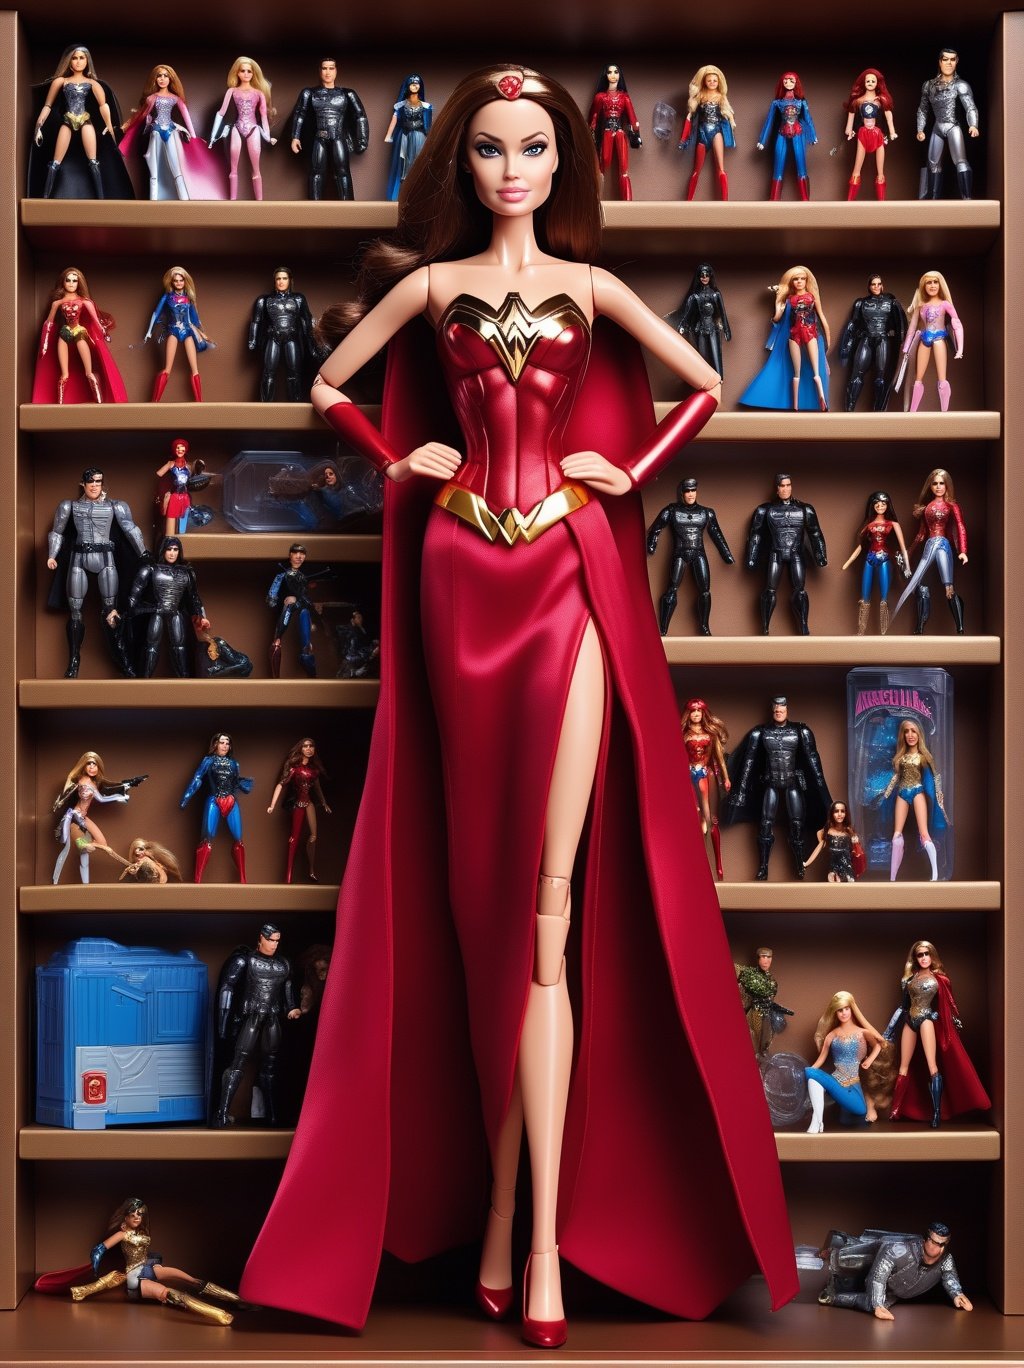 premium playset toy box, (masterpiece, best quality, ultra detailed, absurdres),(inboxDollPlaySetQuiron style), the barbie superheroine angelina jolie, (plastic toy playset pack), inside gift box, <lyco:SDXL1.0_quiron_inboxDollPlaySet_v5.1_lycoris:0.97>